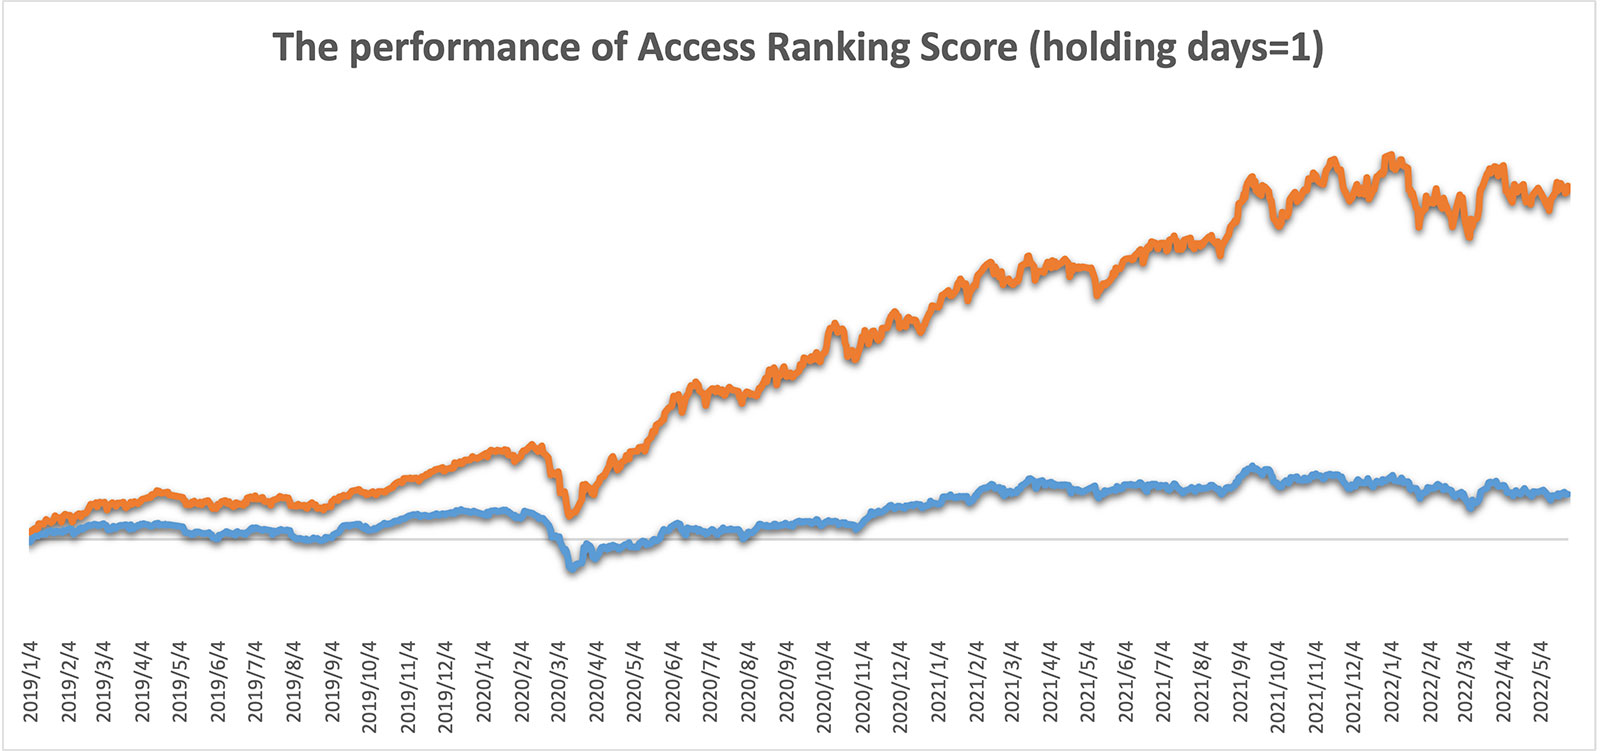 The performance of Access Ranking Score (holding days=1)